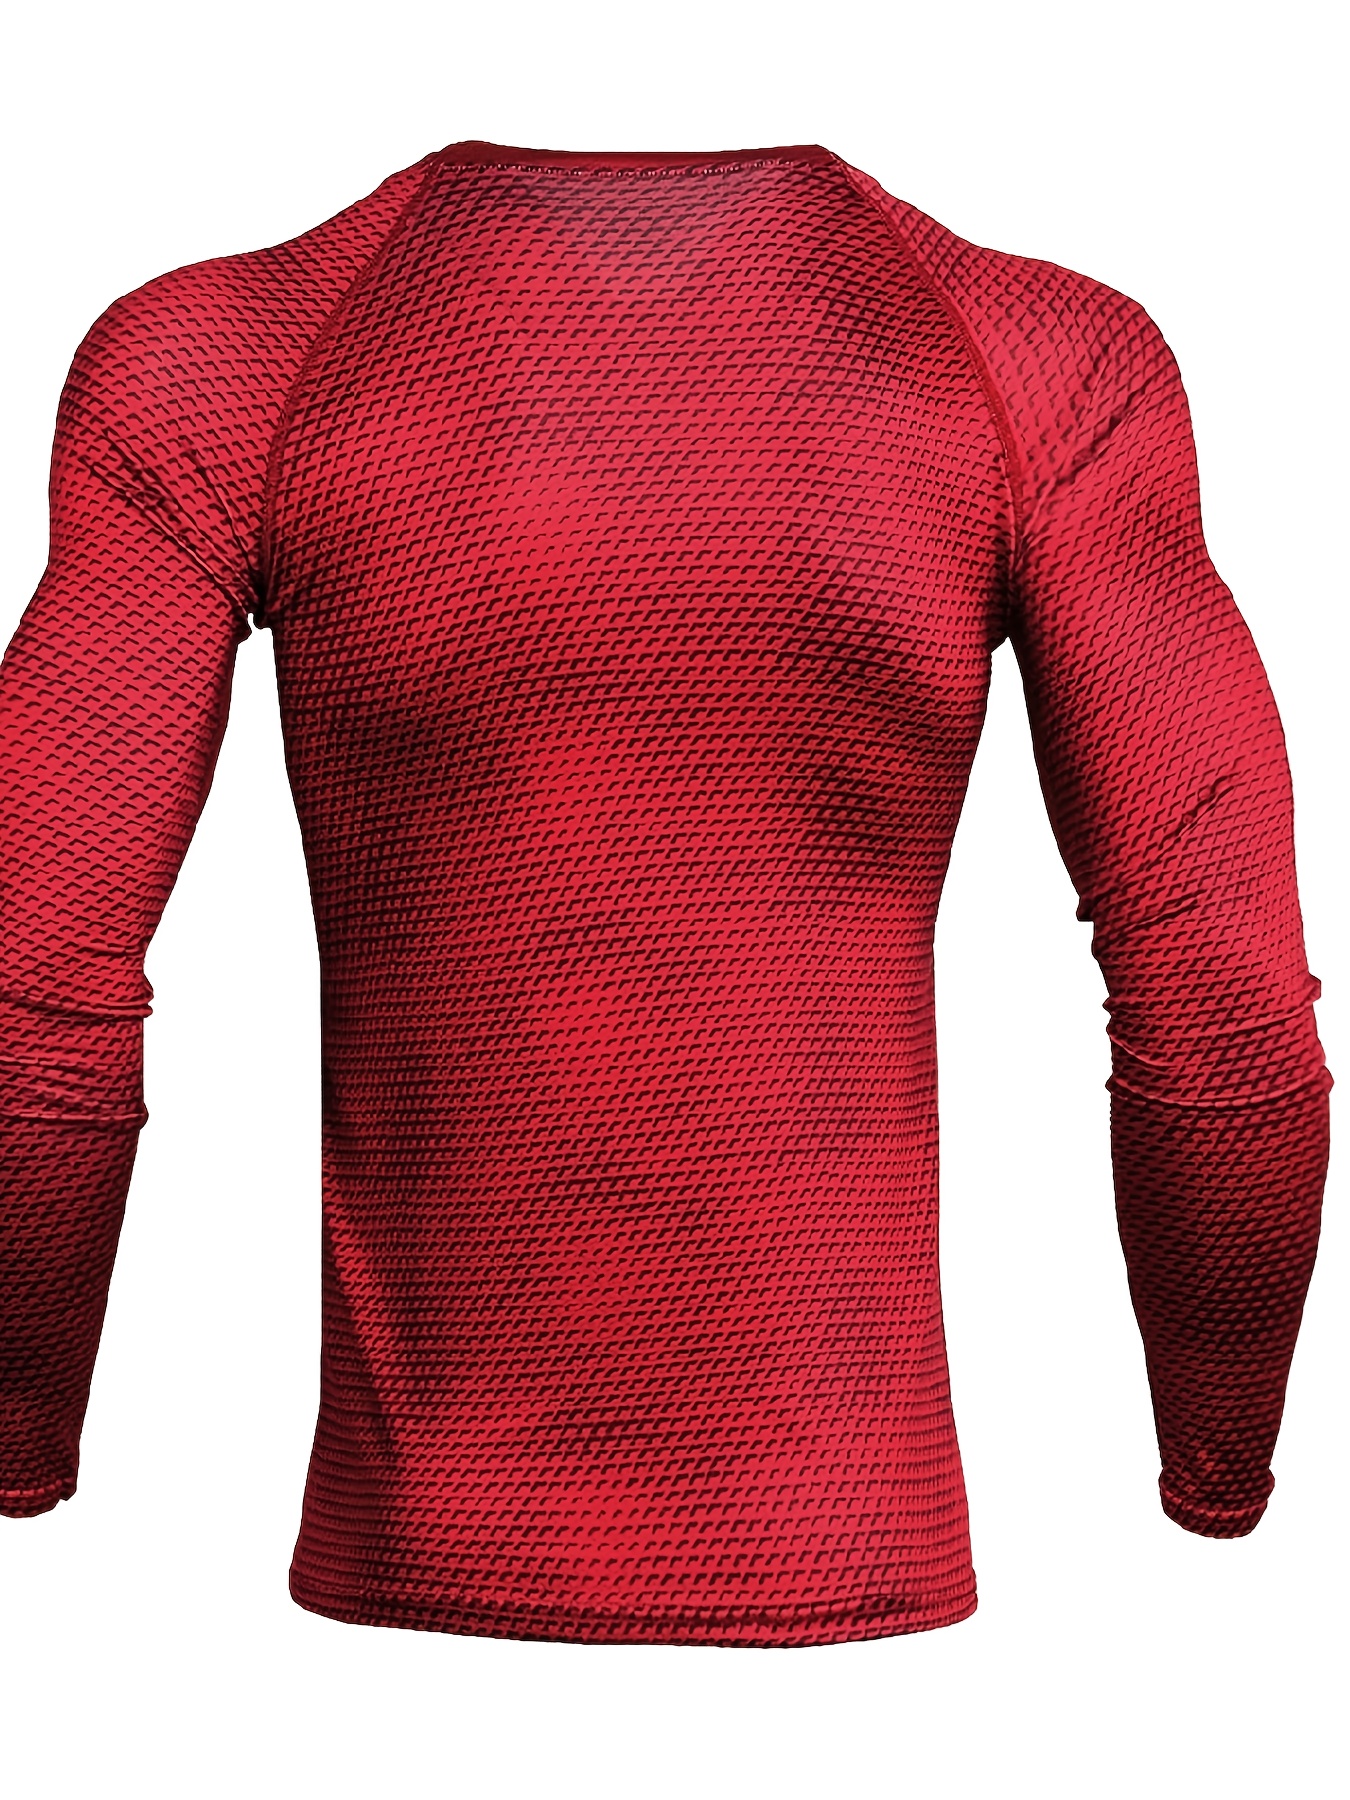 Men's Long Sleeve Muscle Fit Gym T Shirts Tight Legging Red - PKAWAY